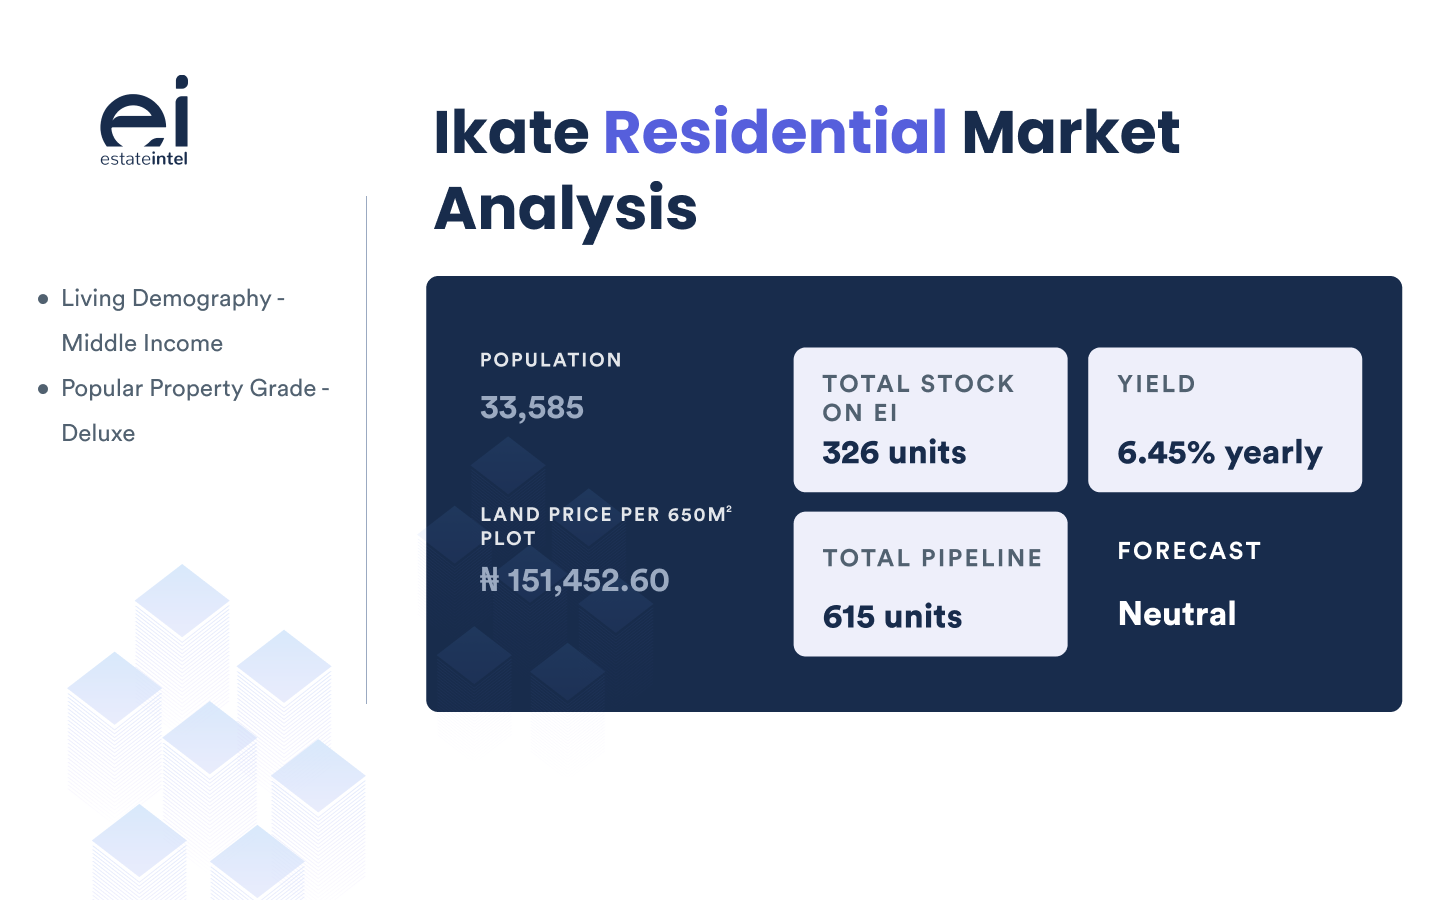 Ikate Is reaping spillover demand from Lekki Phase 1, here is why it is rapidly emerging as another loved residential suburb